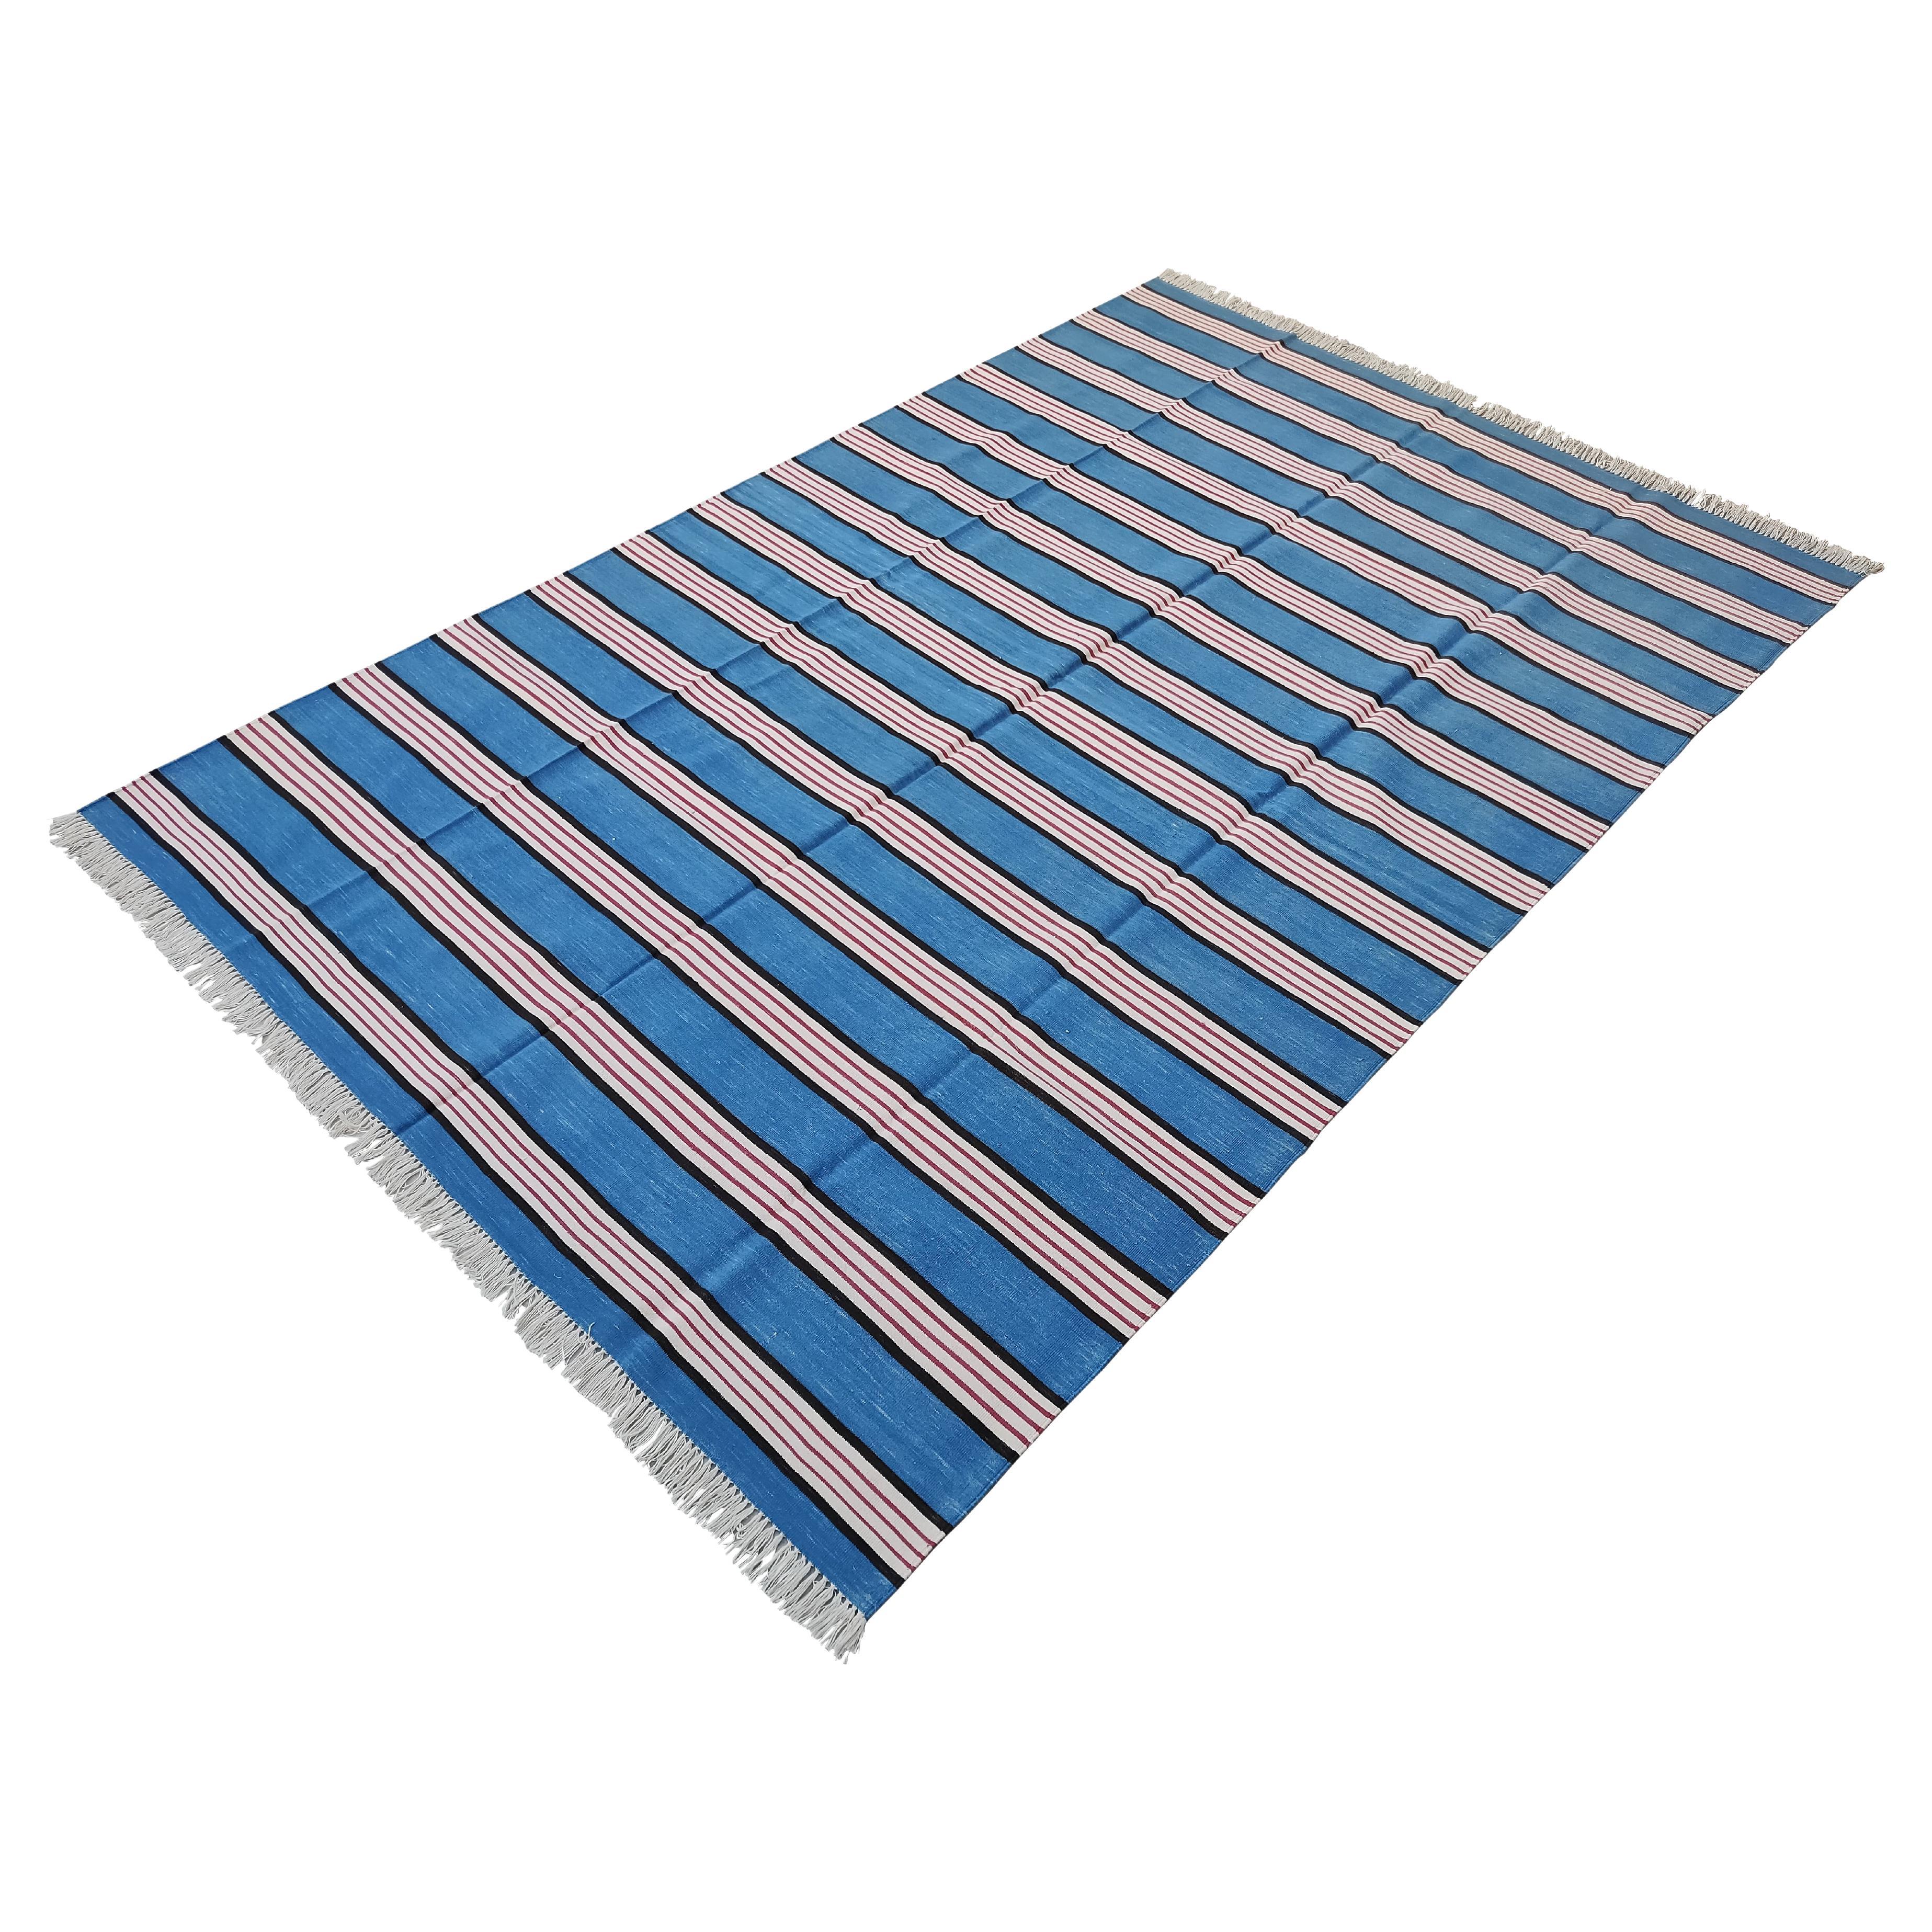 Handmade Cotton Area Flat Weave Rug, 6x9 Blue And Pink Striped Indian Dhurrie For Sale